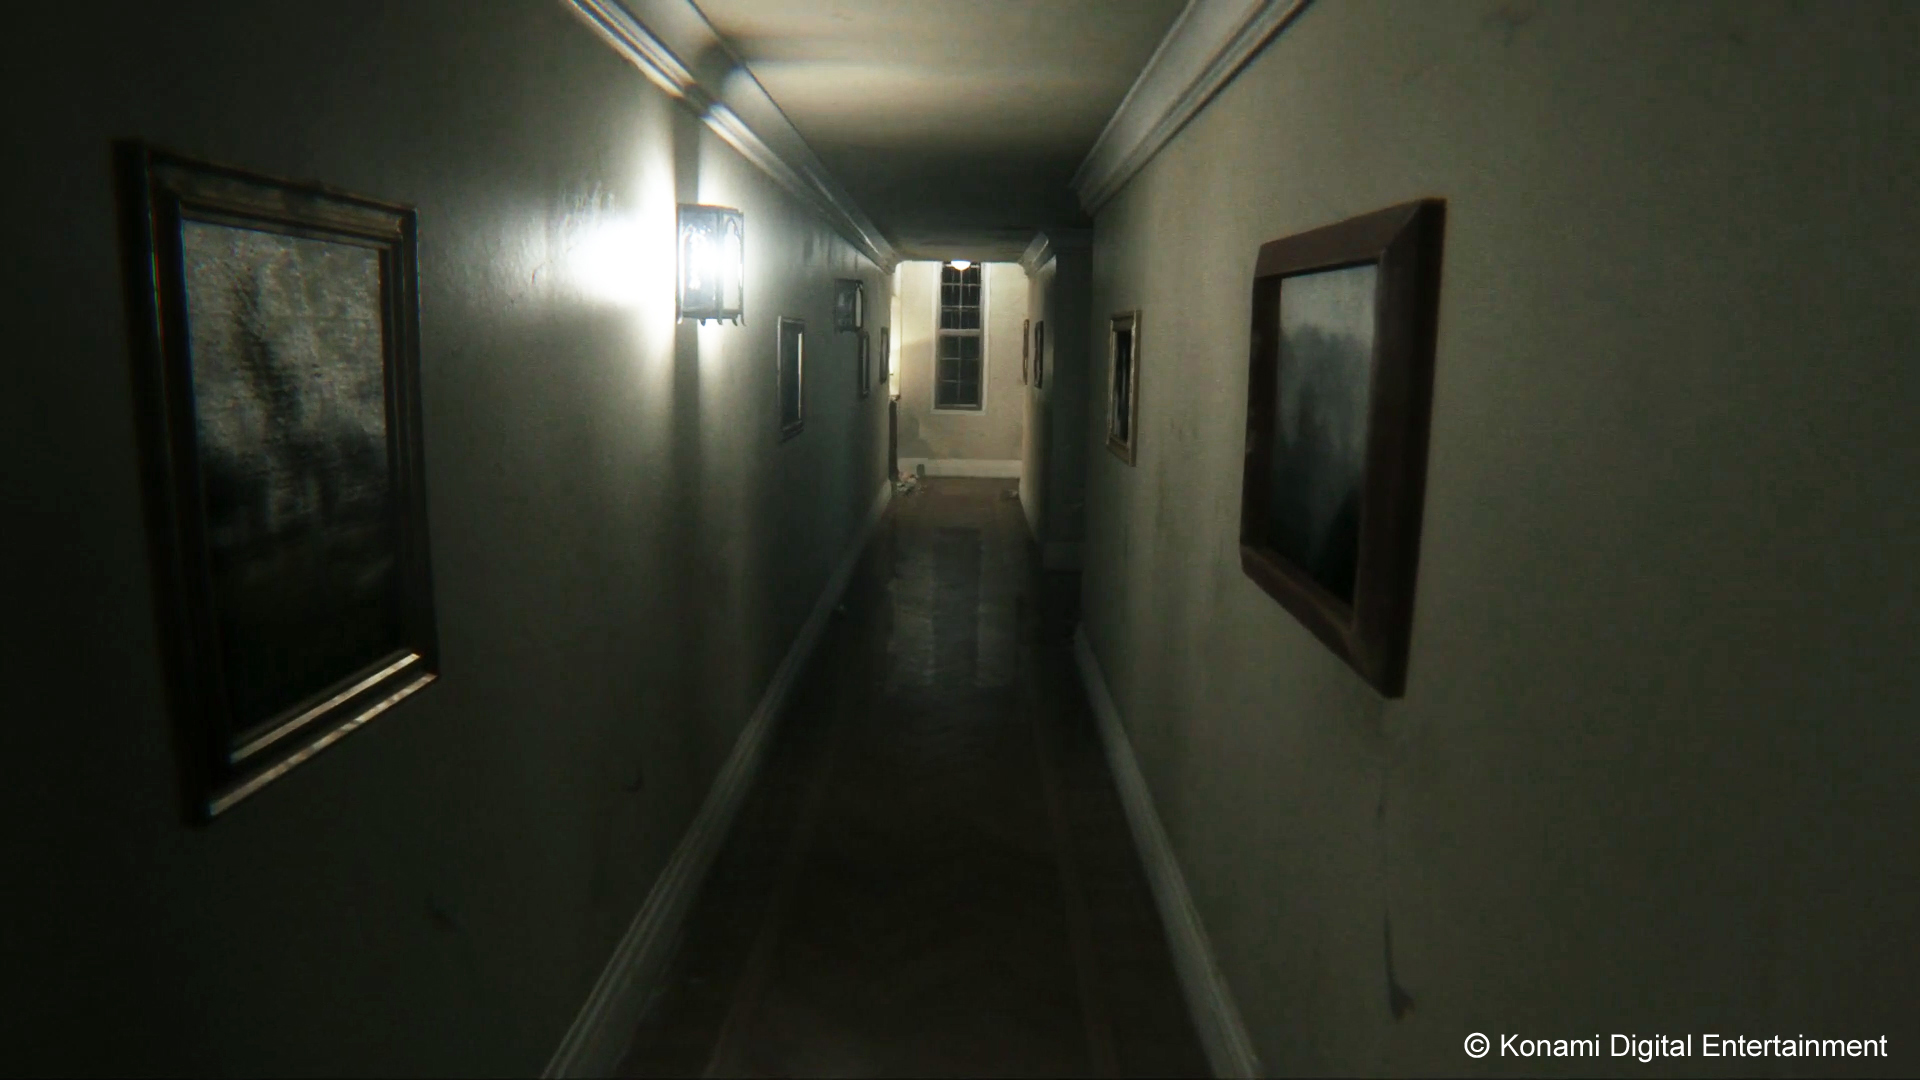 What Layers Of Fear Tells Us About The Silent Hill 2 Remake